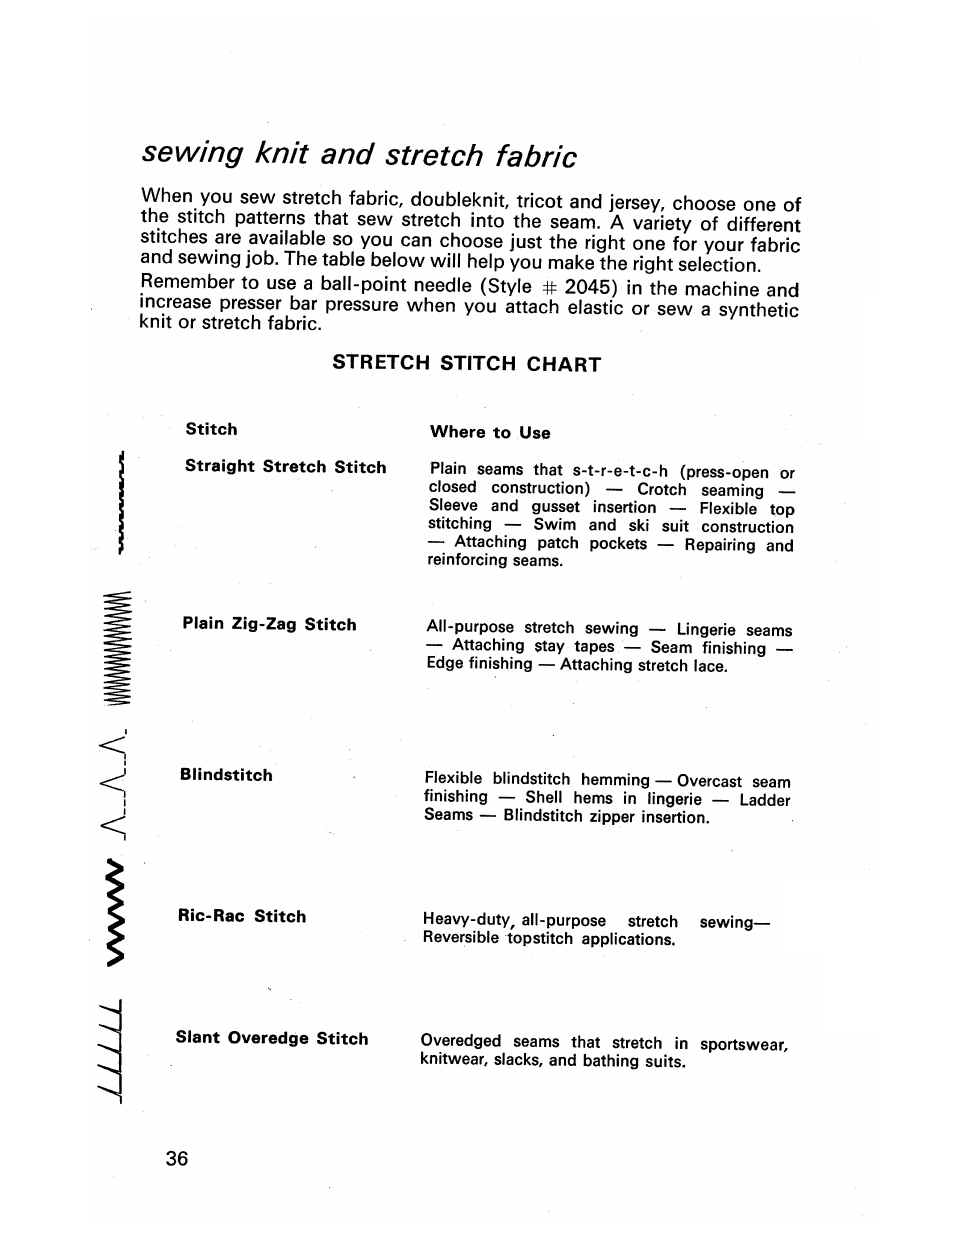 Sewing knit and stretch fabric, Stretch stitch chart, Sewing thepr^ofessional way | SINGER 413 User Manual | Page 38 / 64